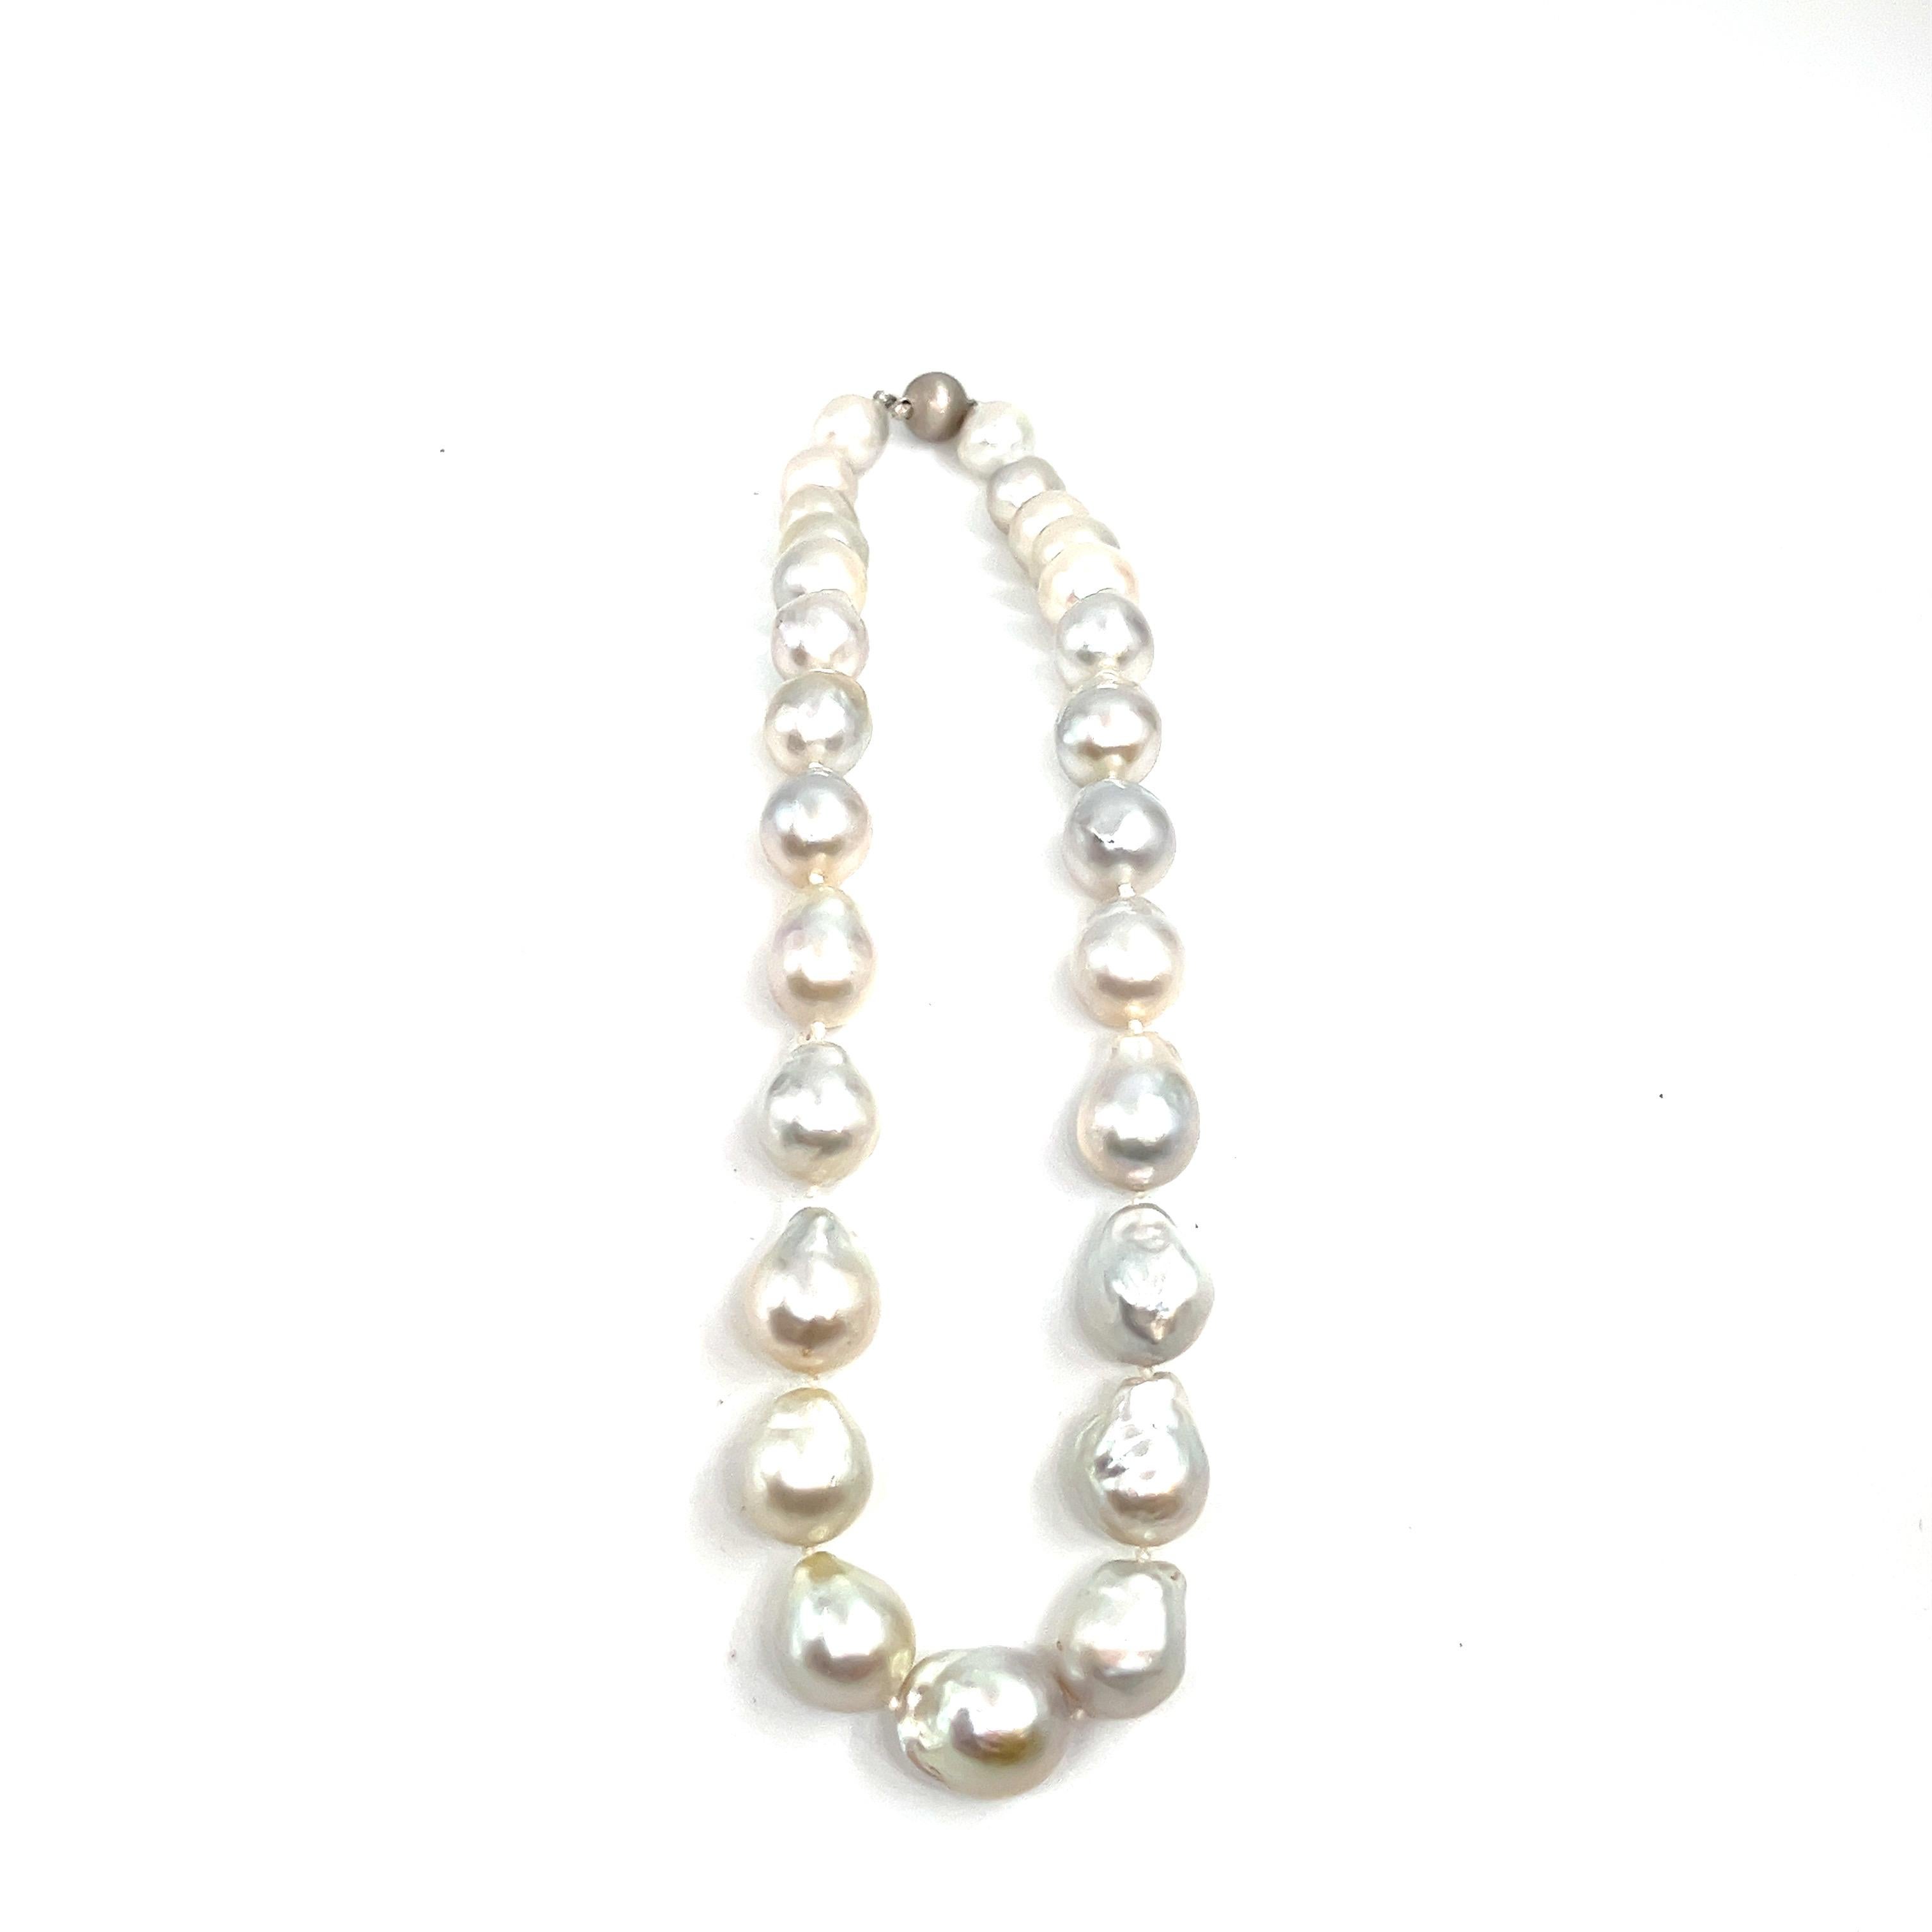 This beautiful Baroque pearl necklace features pearls that are 12 mm to 15 mm thick. A gorgeous addition to any wardrobe. 